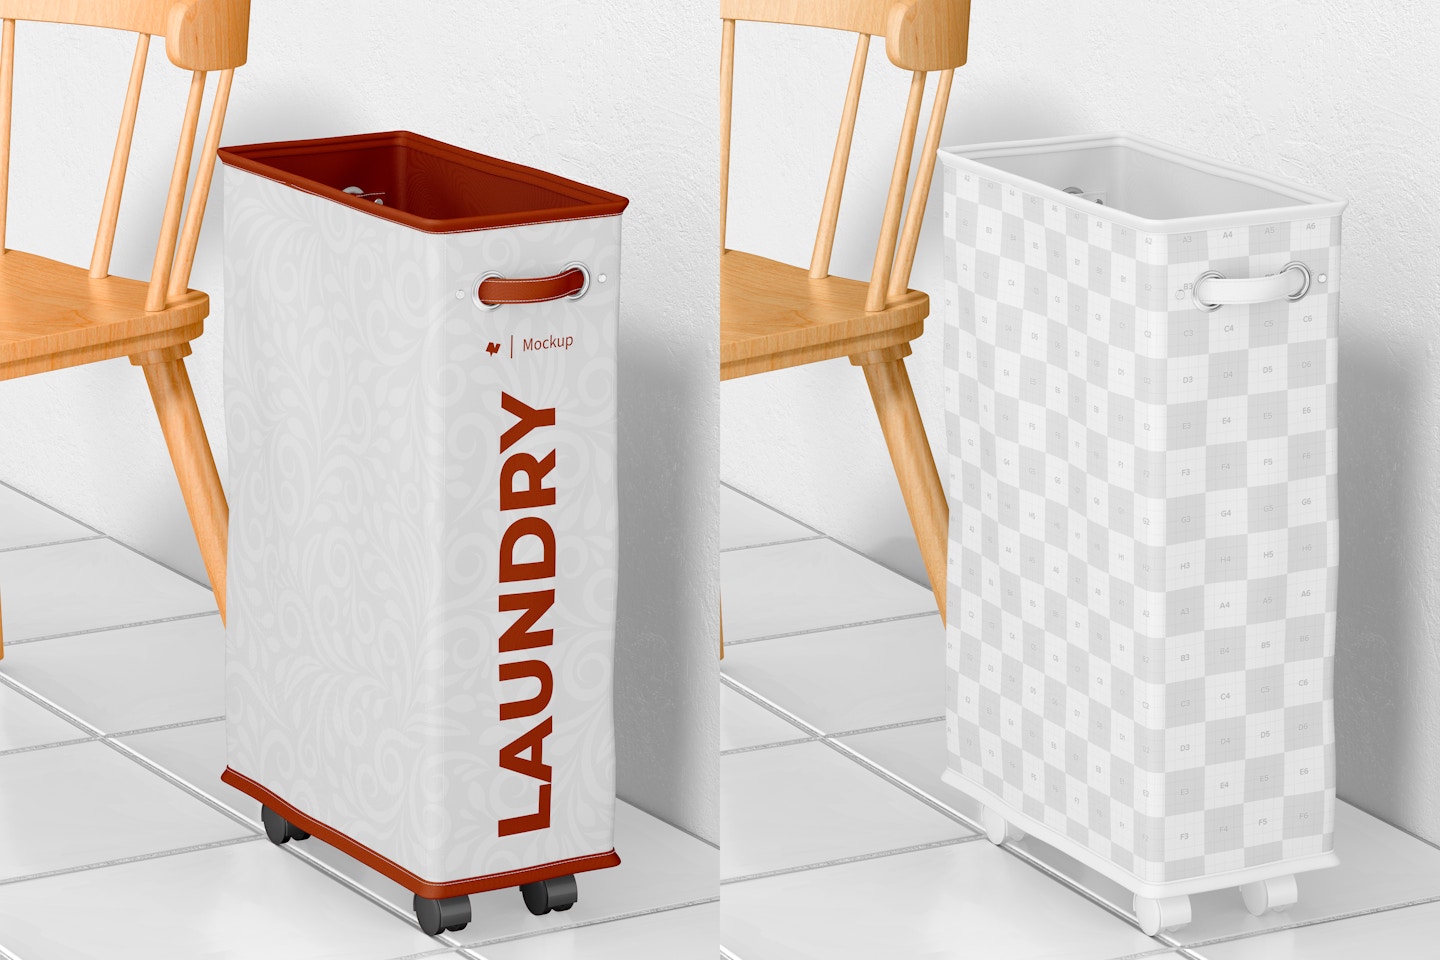 Large Laundry Hamper Mockup, Right View